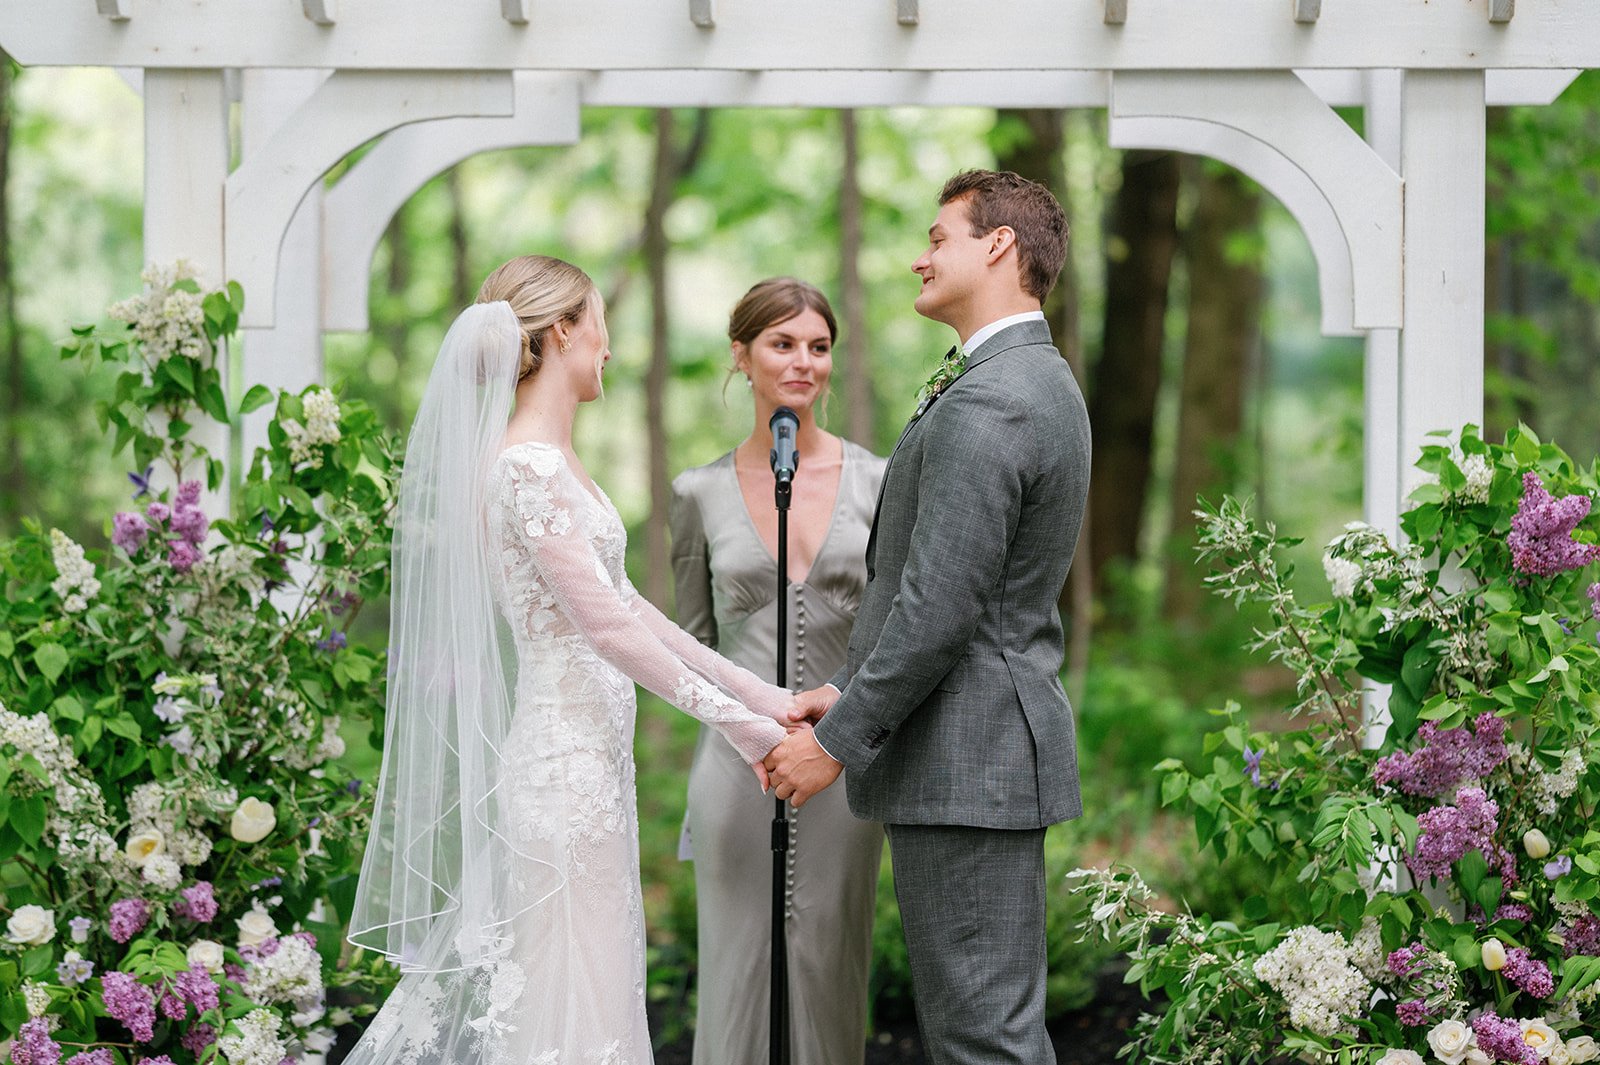 Ceremony Photo with Arbor and Alter Pieces